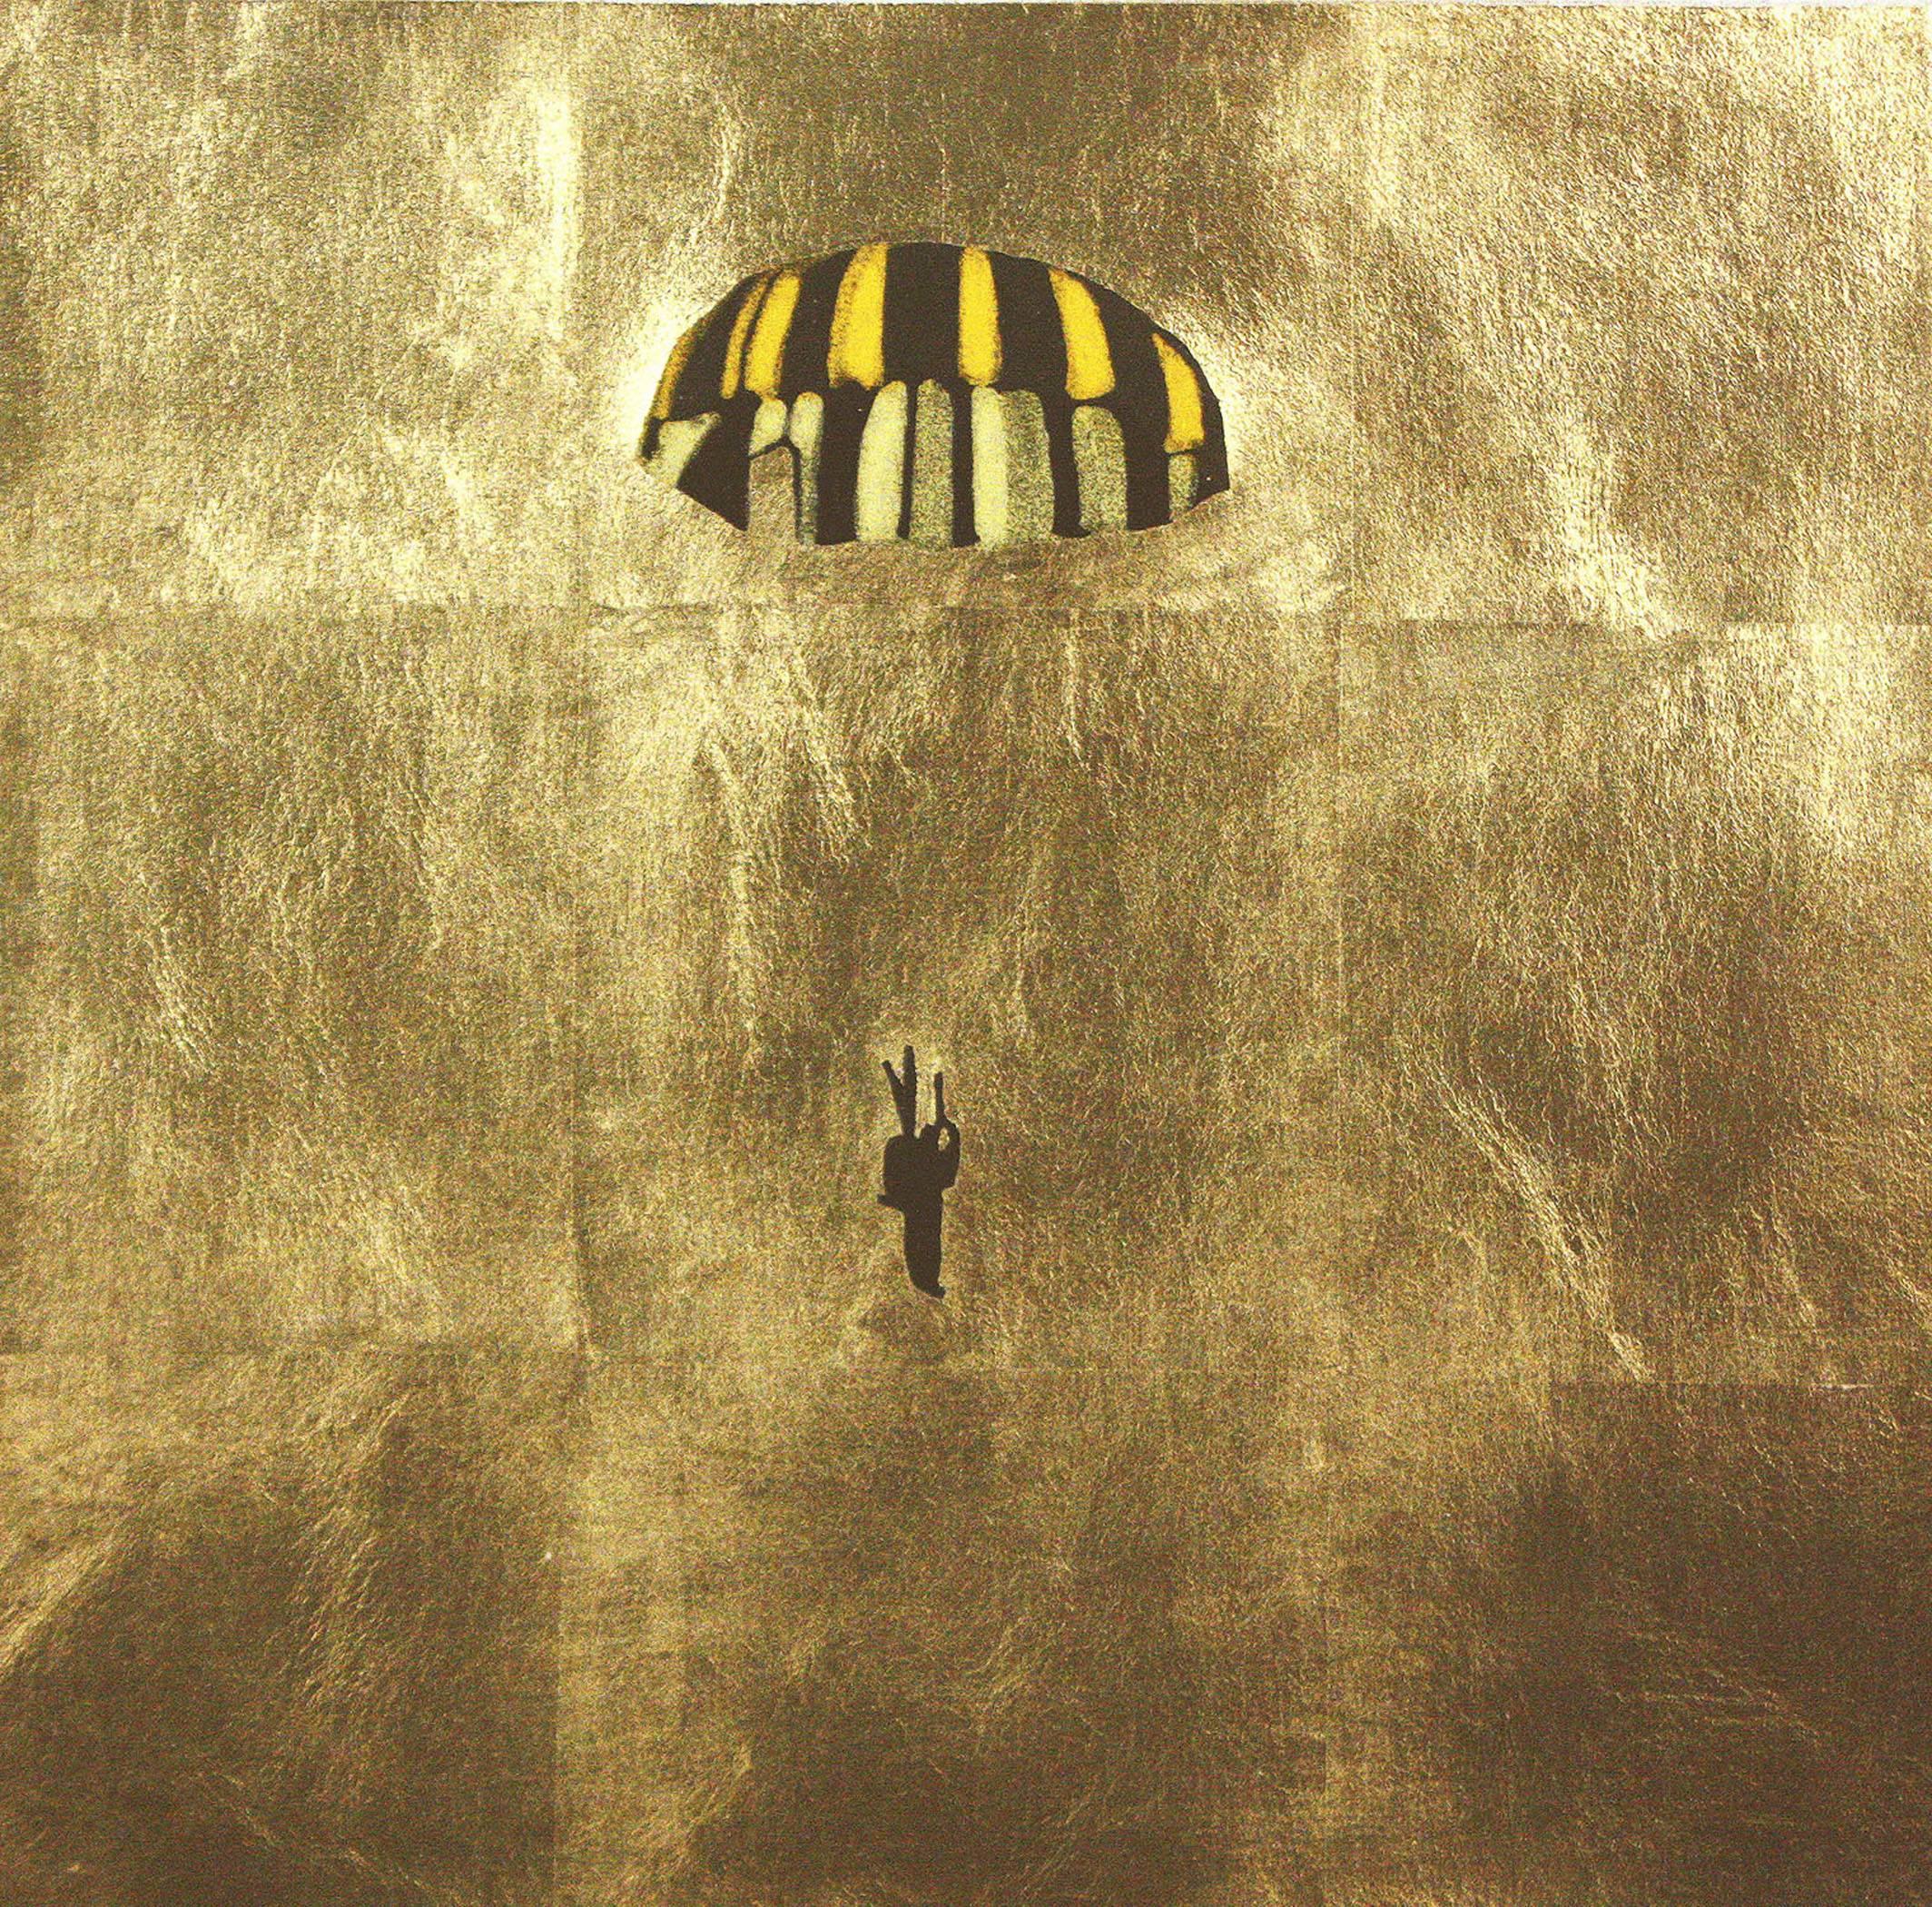 Golden Parachute - Print by Isca Greenfield-Sanders